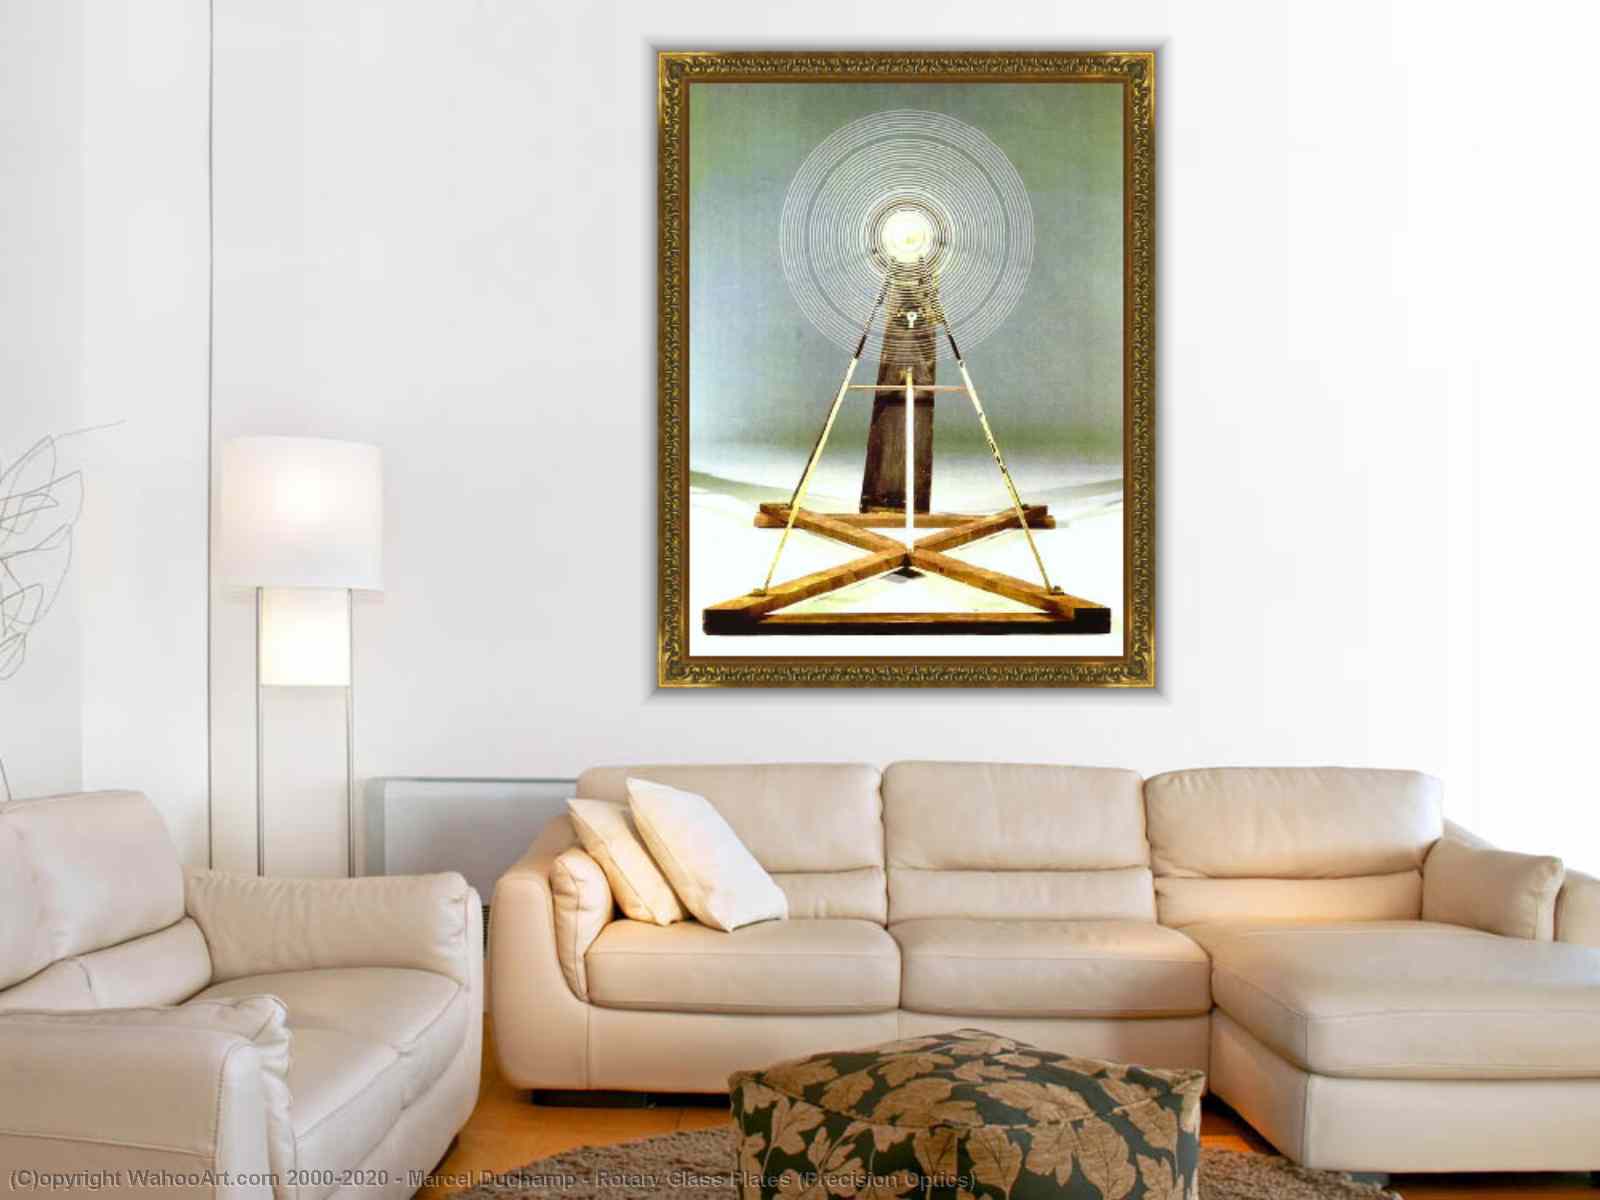 Artista Primer ministro Papá Rotary Glass Plates (Precision Optics) by Marcel Duchamp | Paintings  Reproductions | Most-Famous-Paintings.com